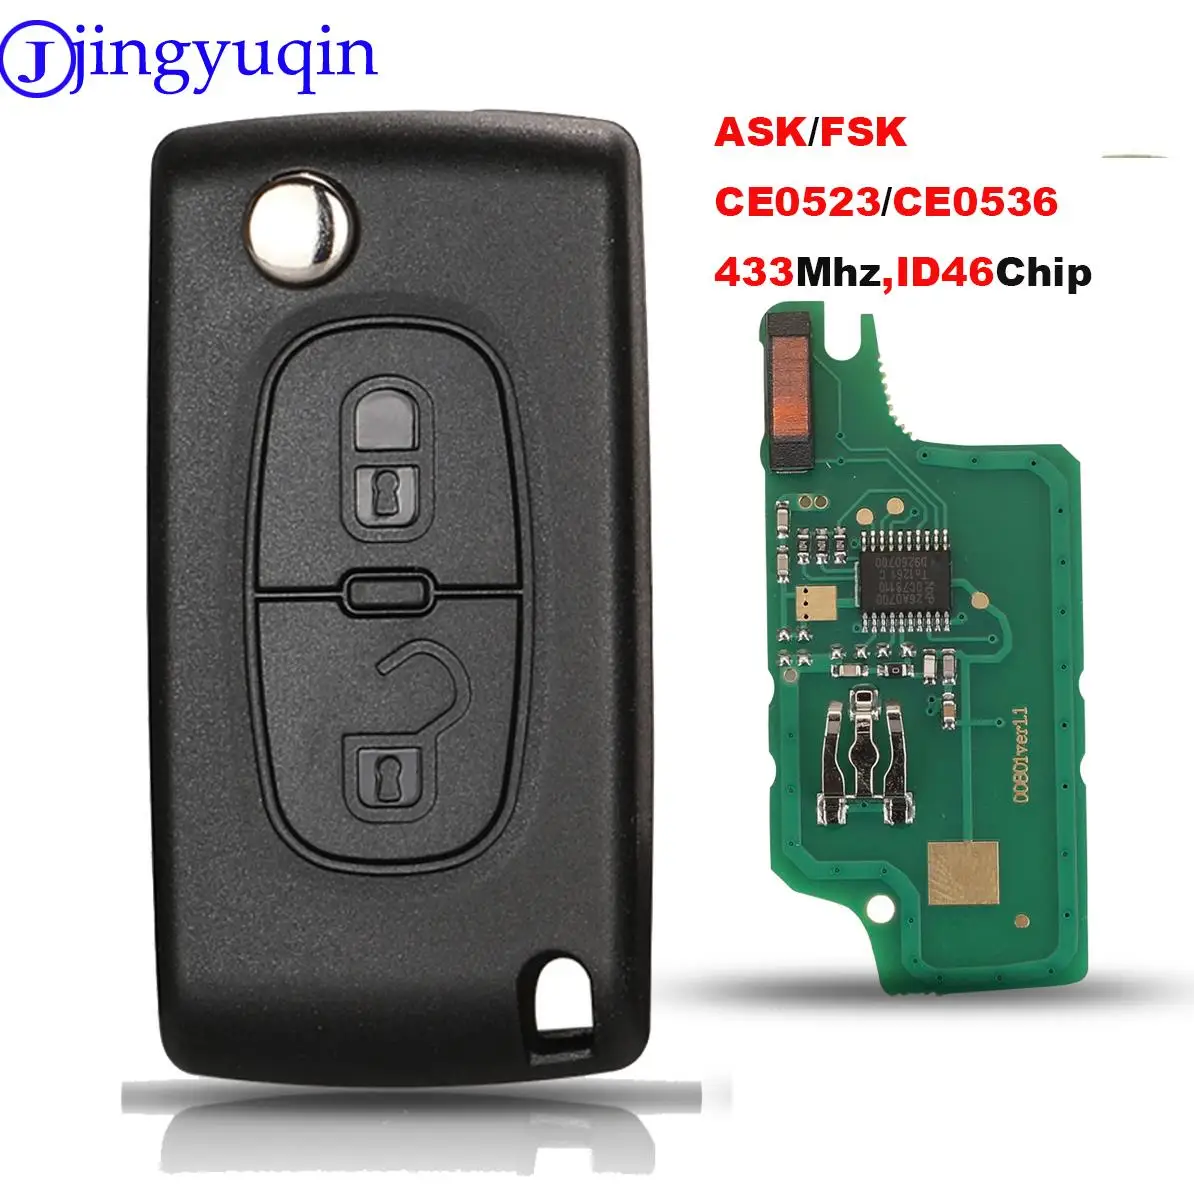 jingyuqin 434Mhz ID46 Chip ASK/FSK For Peugeot 107 207 307 308 407 607 CE0523 Ce0536/Ce523